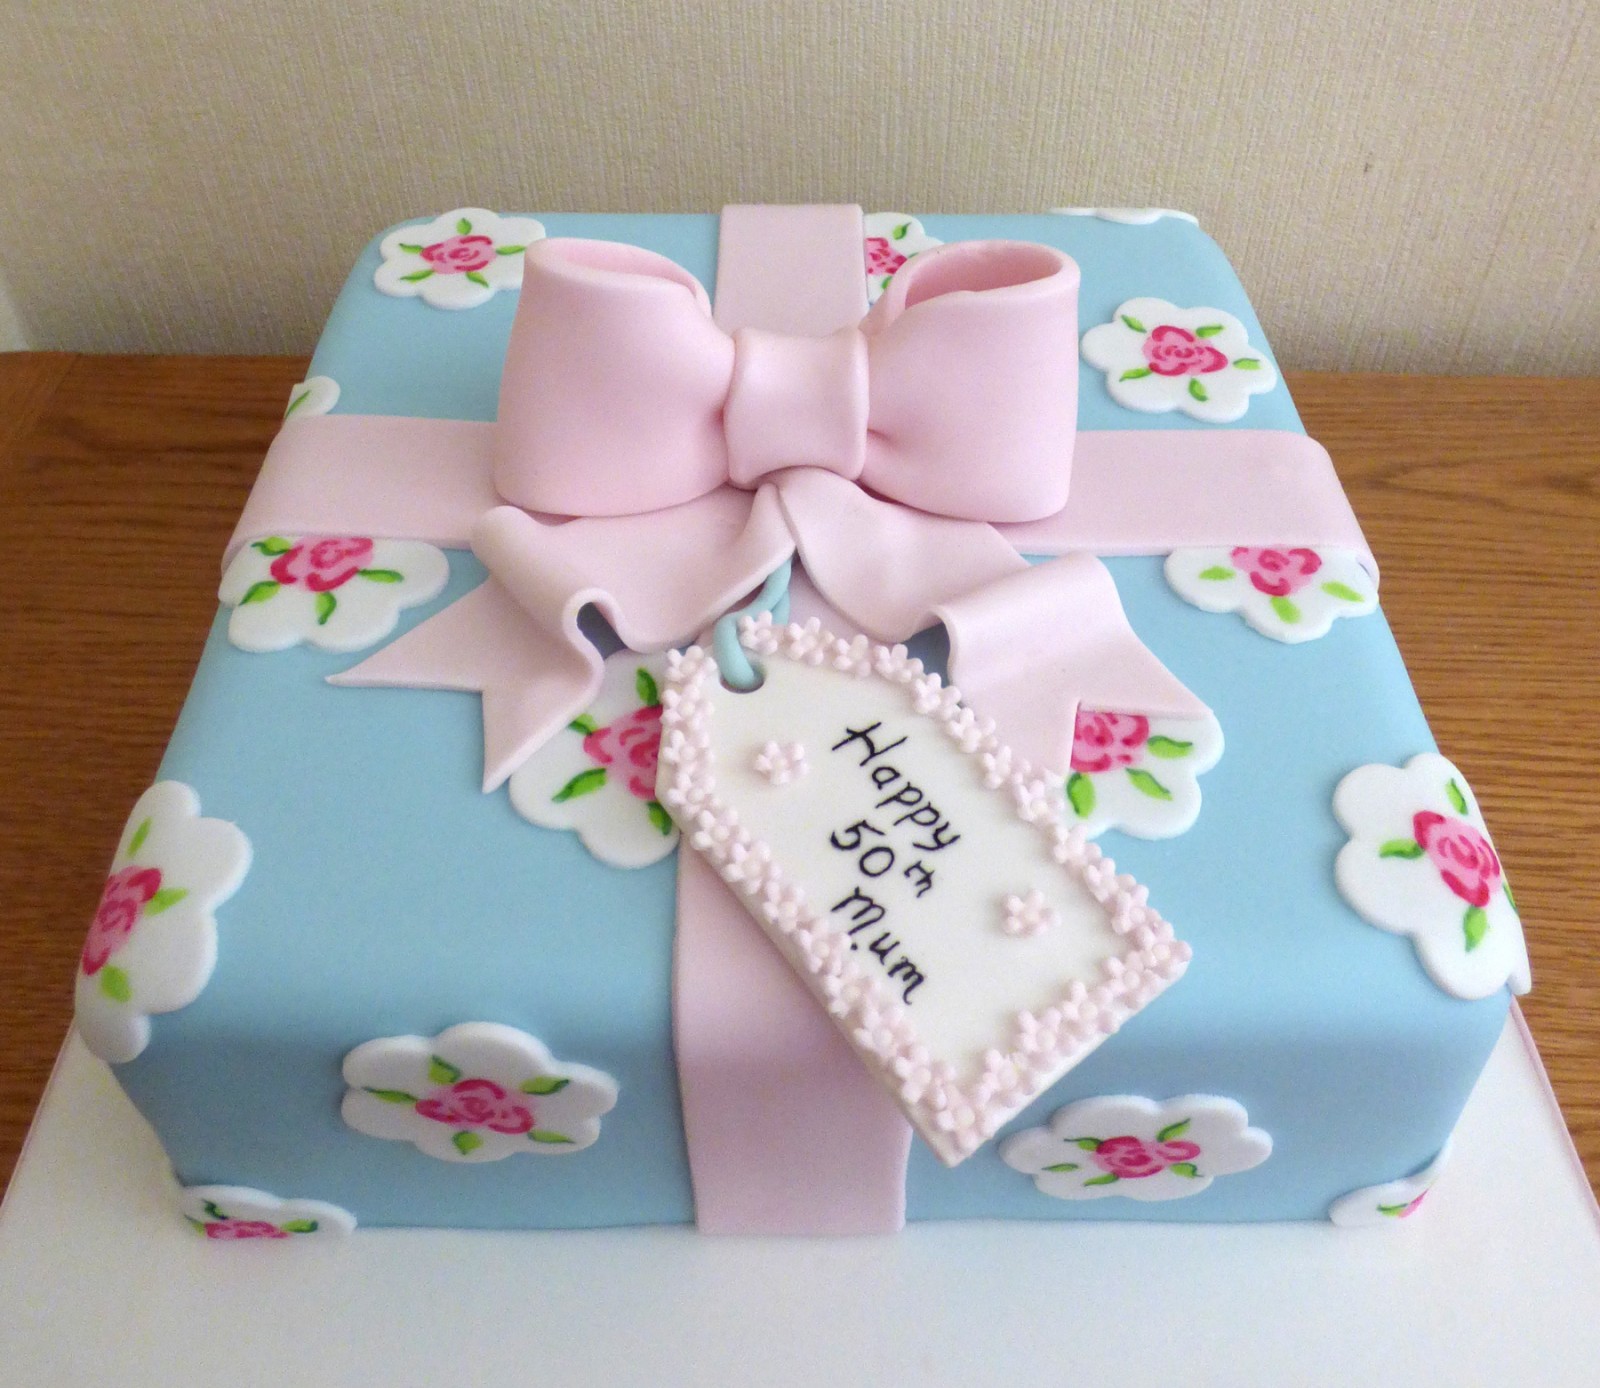 3D Polka Dot Birthday Present Cake with a large sugar bow